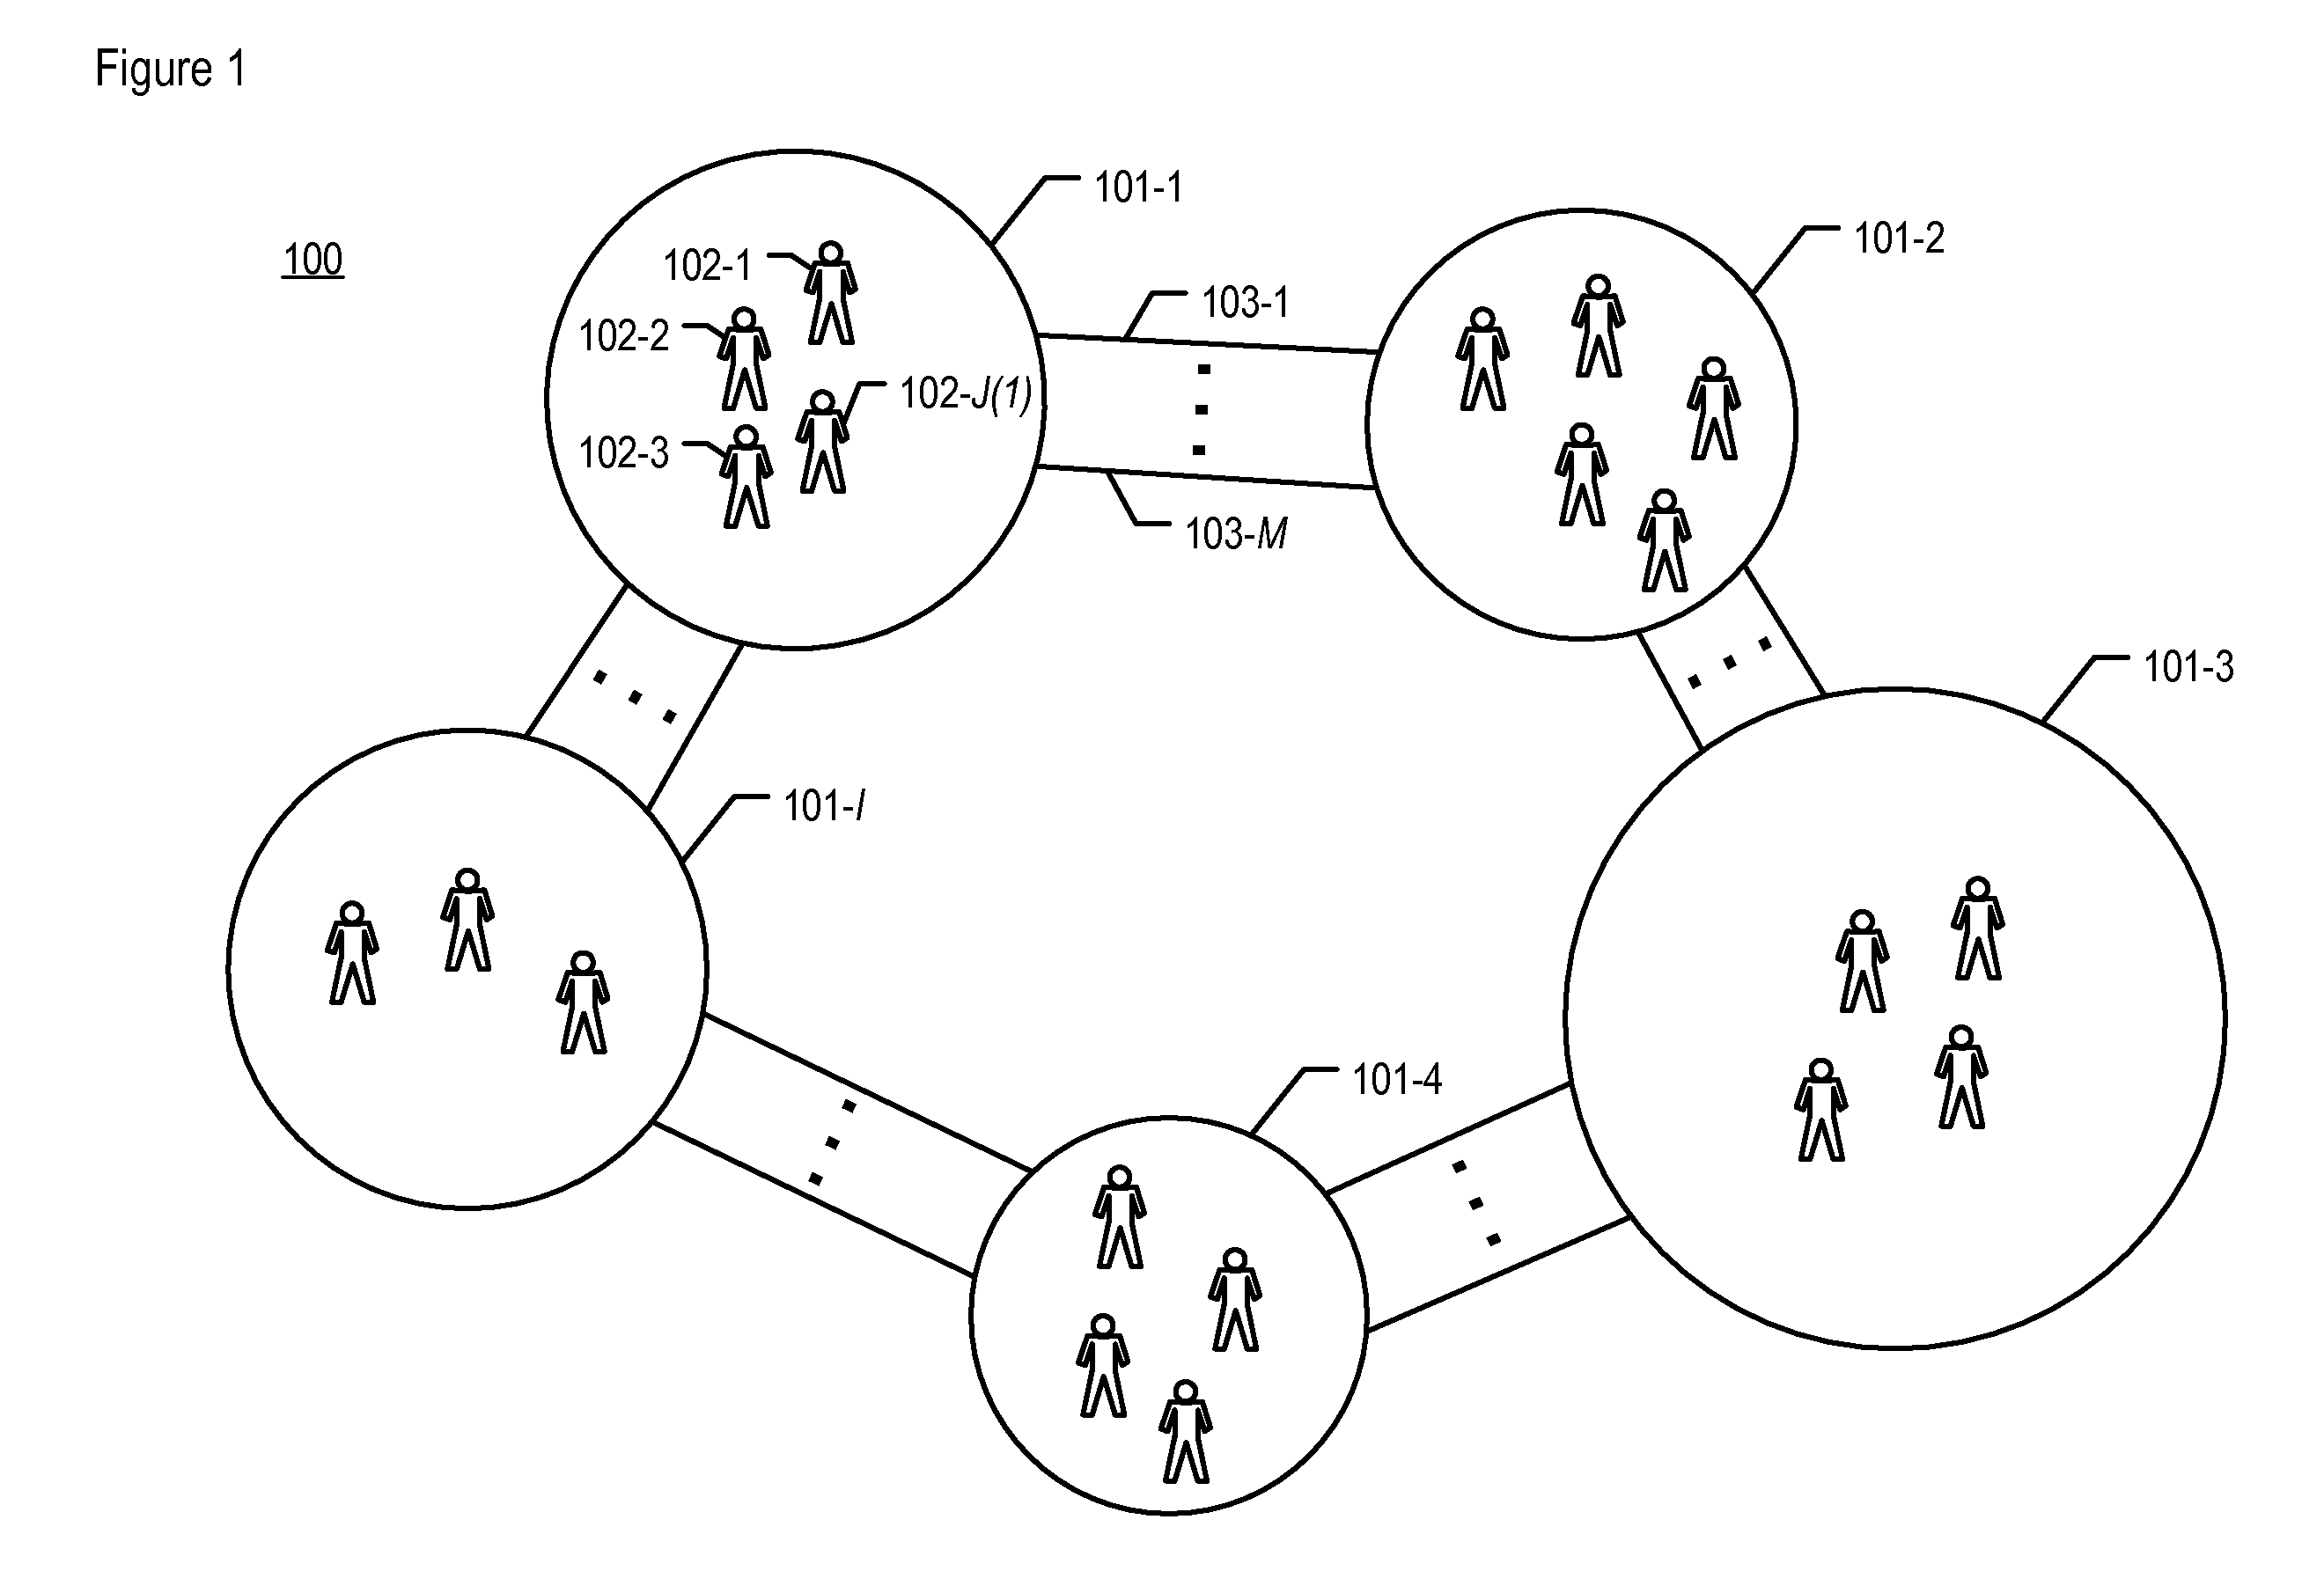 Rule-based System for Determining User Availability